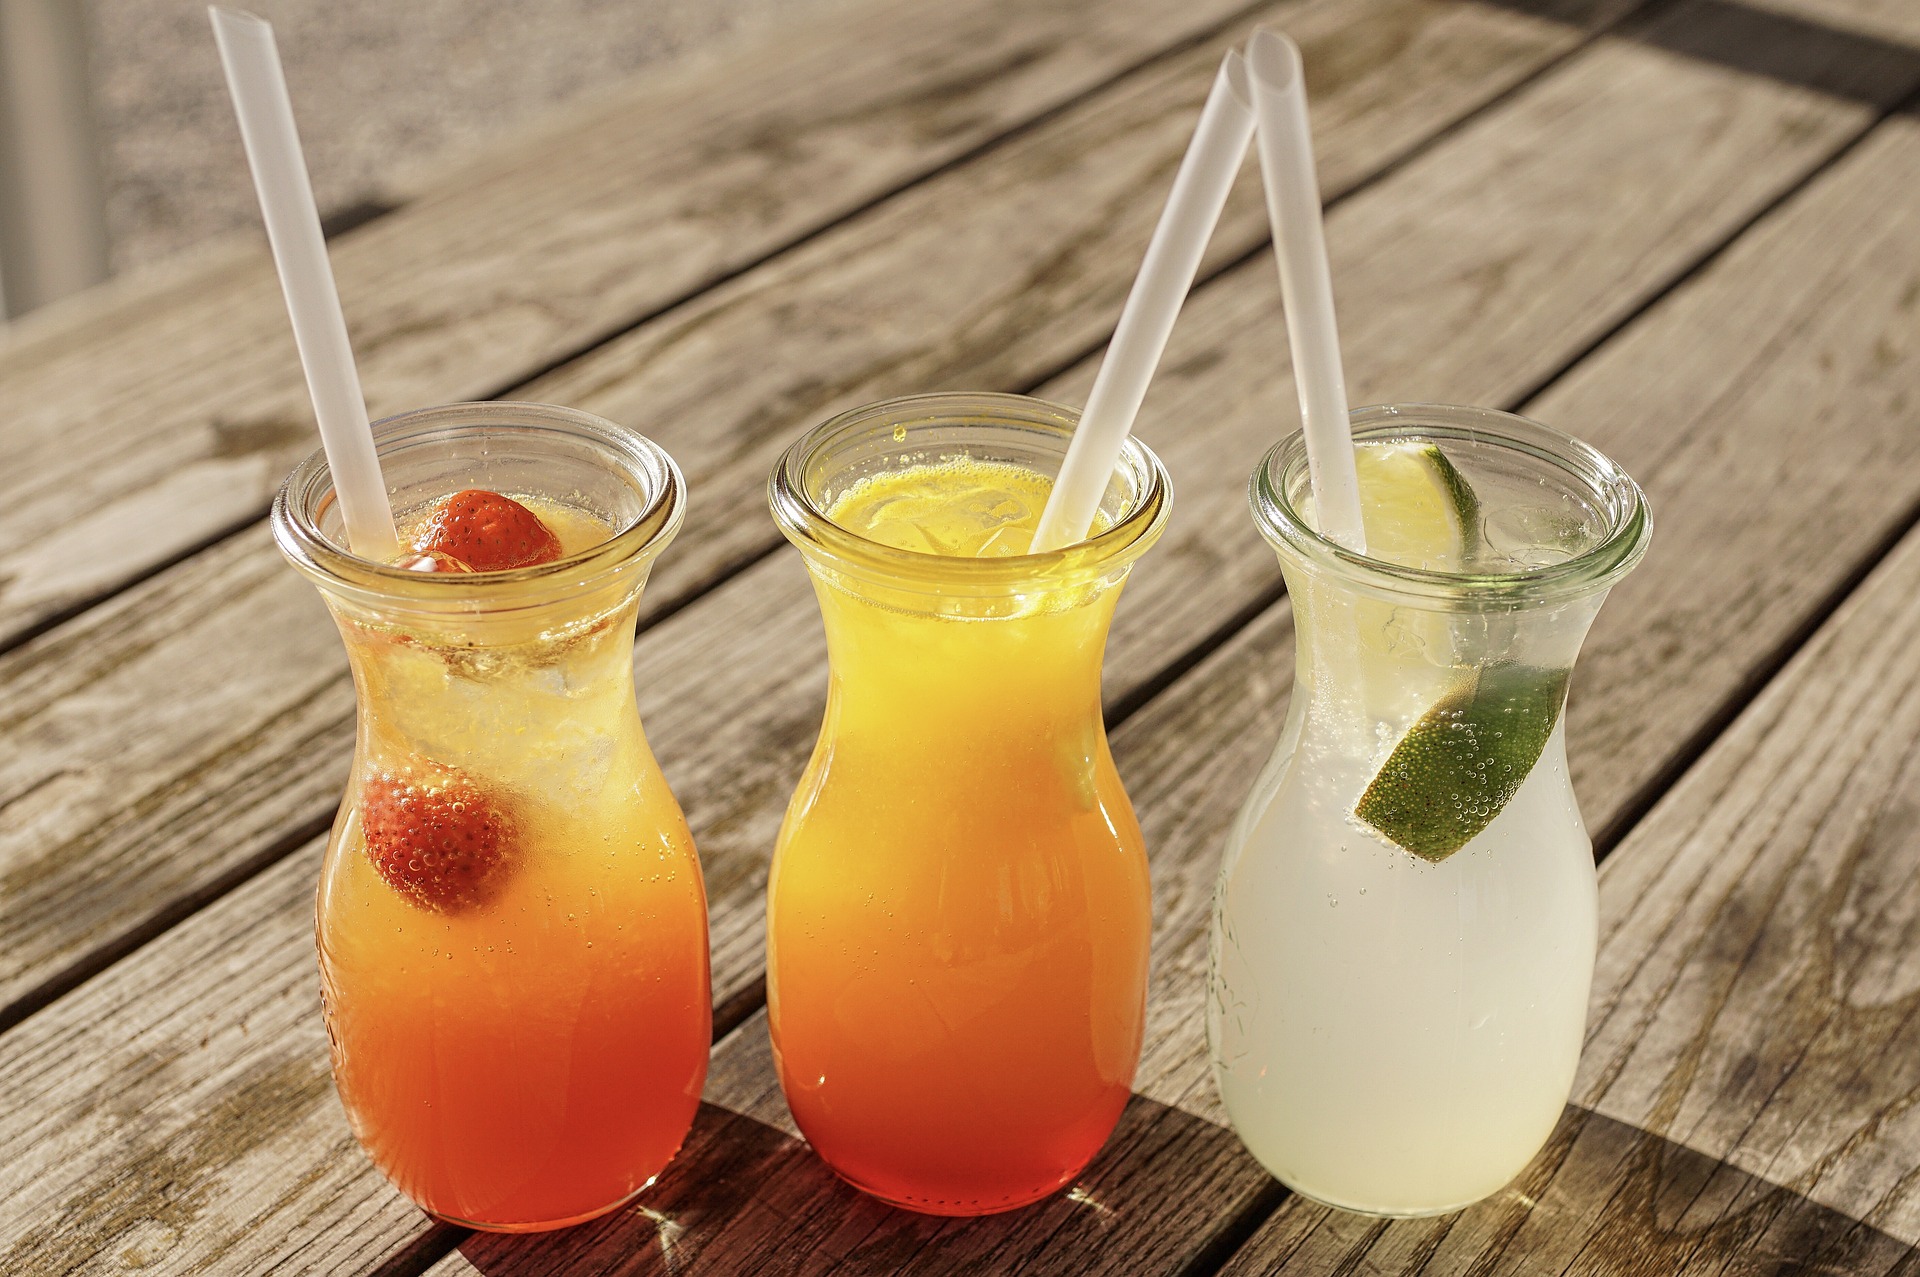 How to Beat the Heat in Summer With Fresh Fruit Juices?